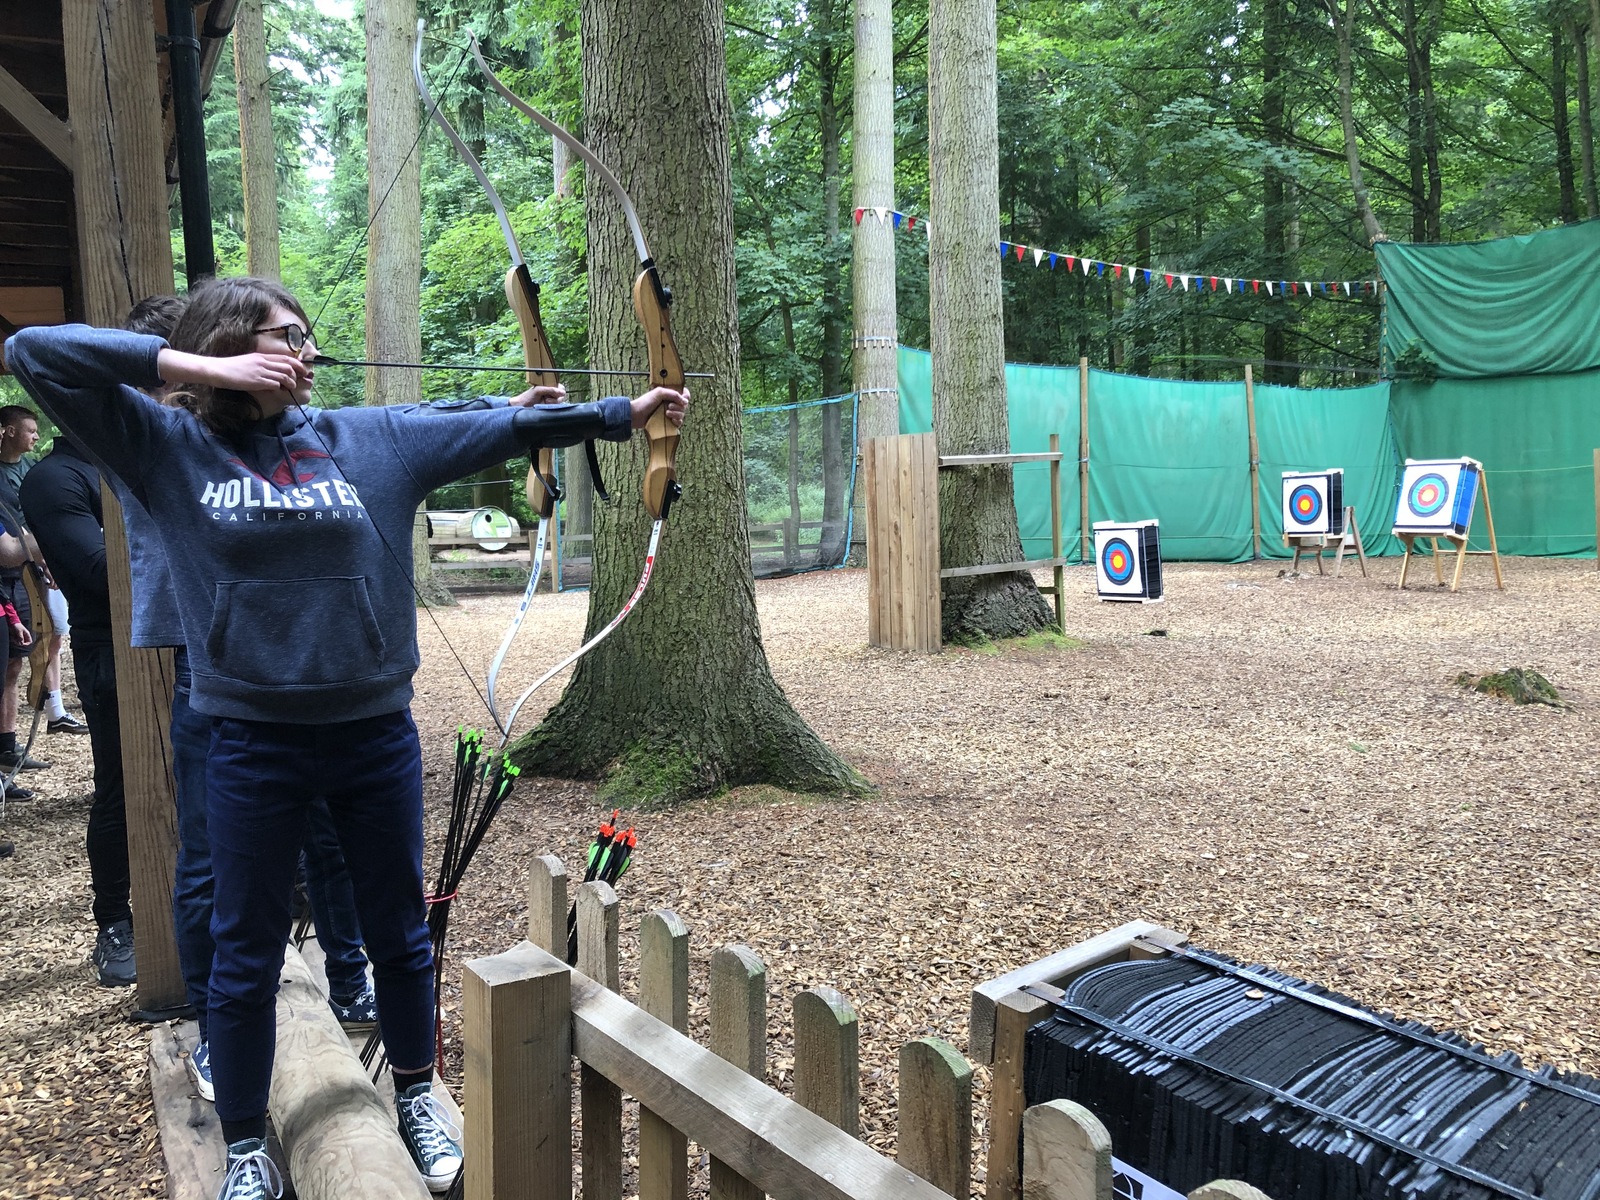 Female archer shooting on outdoor range